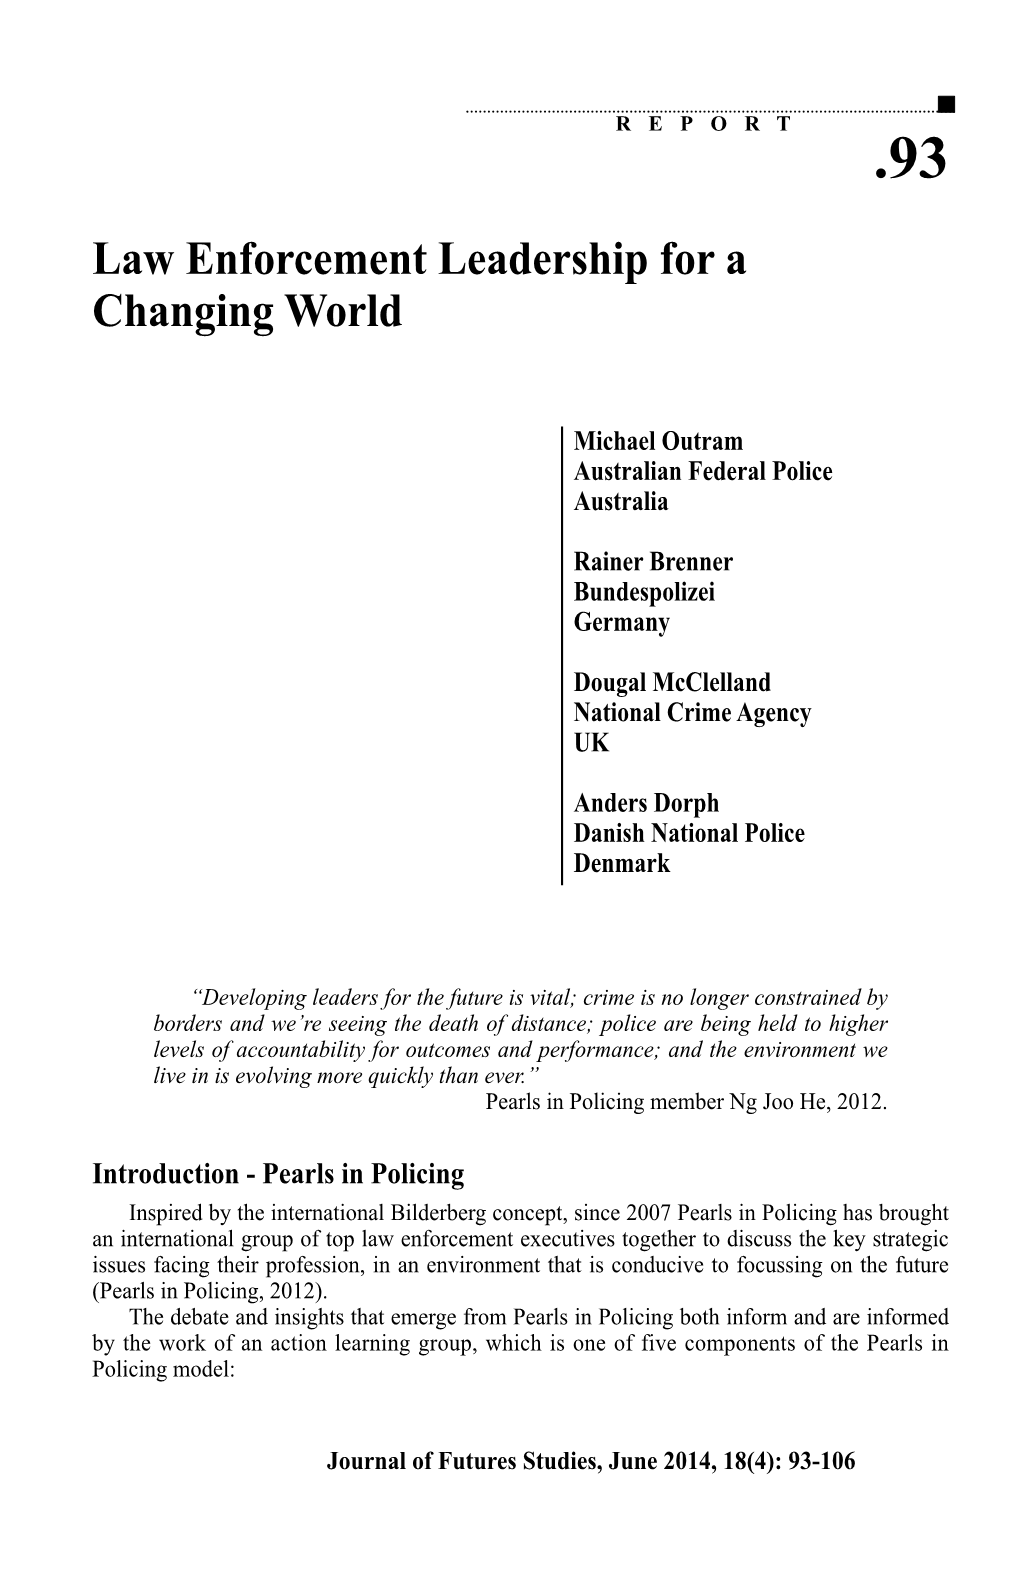 Law Enforcement Leadership for a Changing World